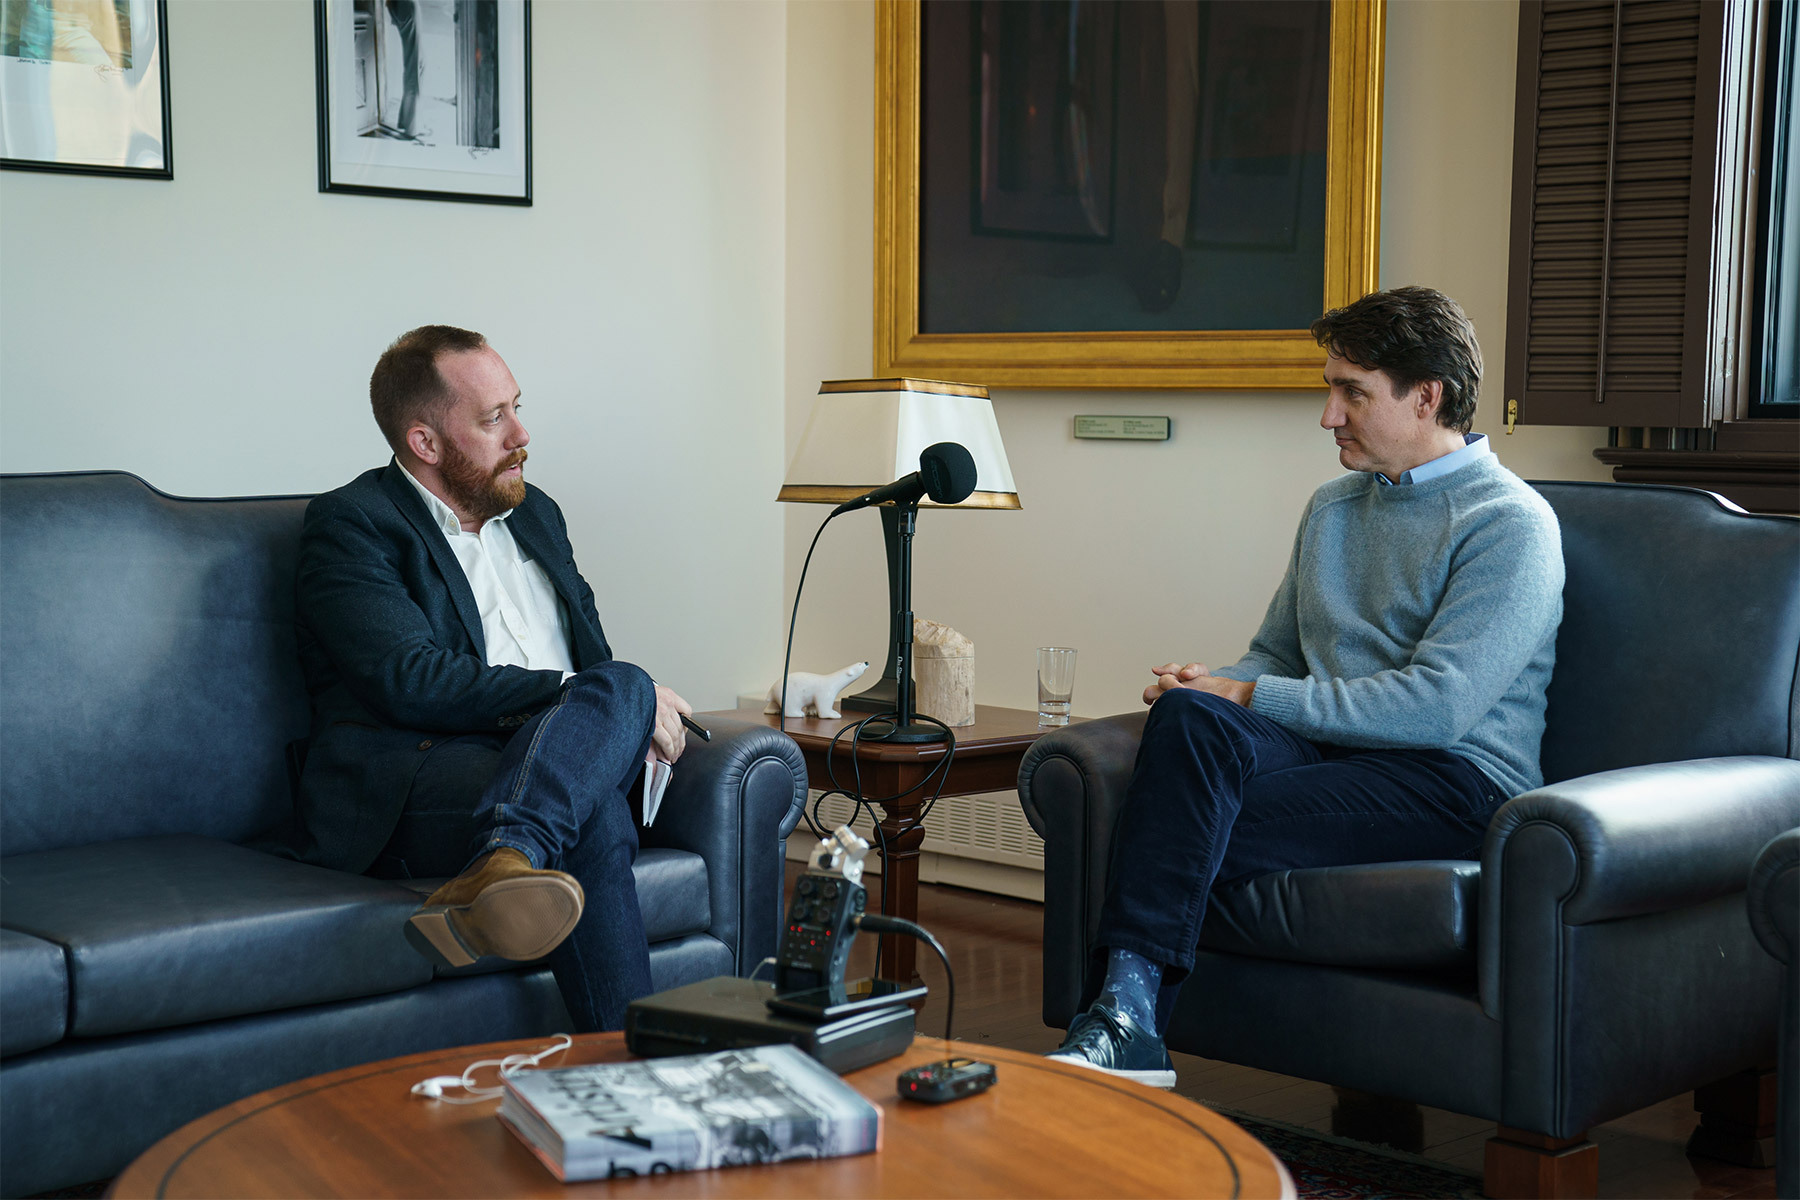 Journalist Justin Ling sits on a blue couch across from Justin Trudeau, seated in a blue arm chair with a microphone on the table between them